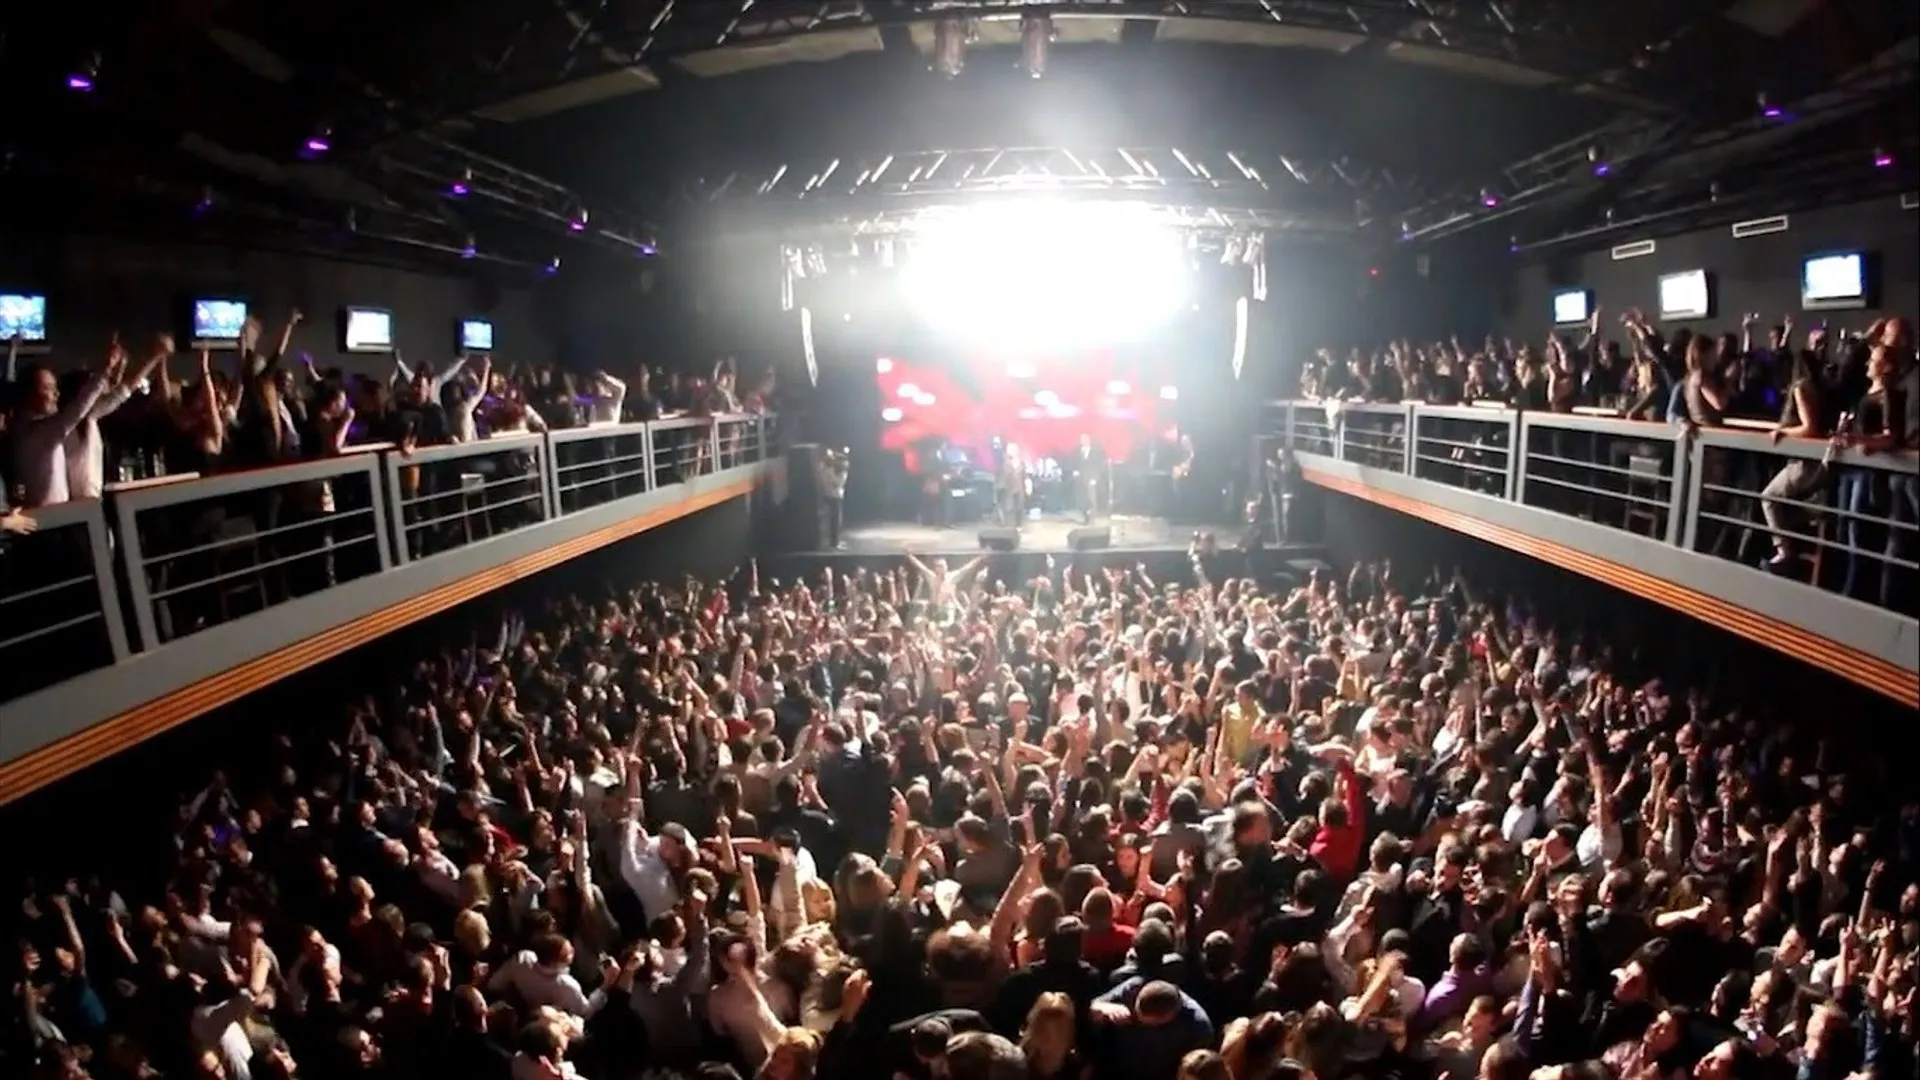 Palermo Groove in Argentina, South America | Nightclubs - Rated 3.4